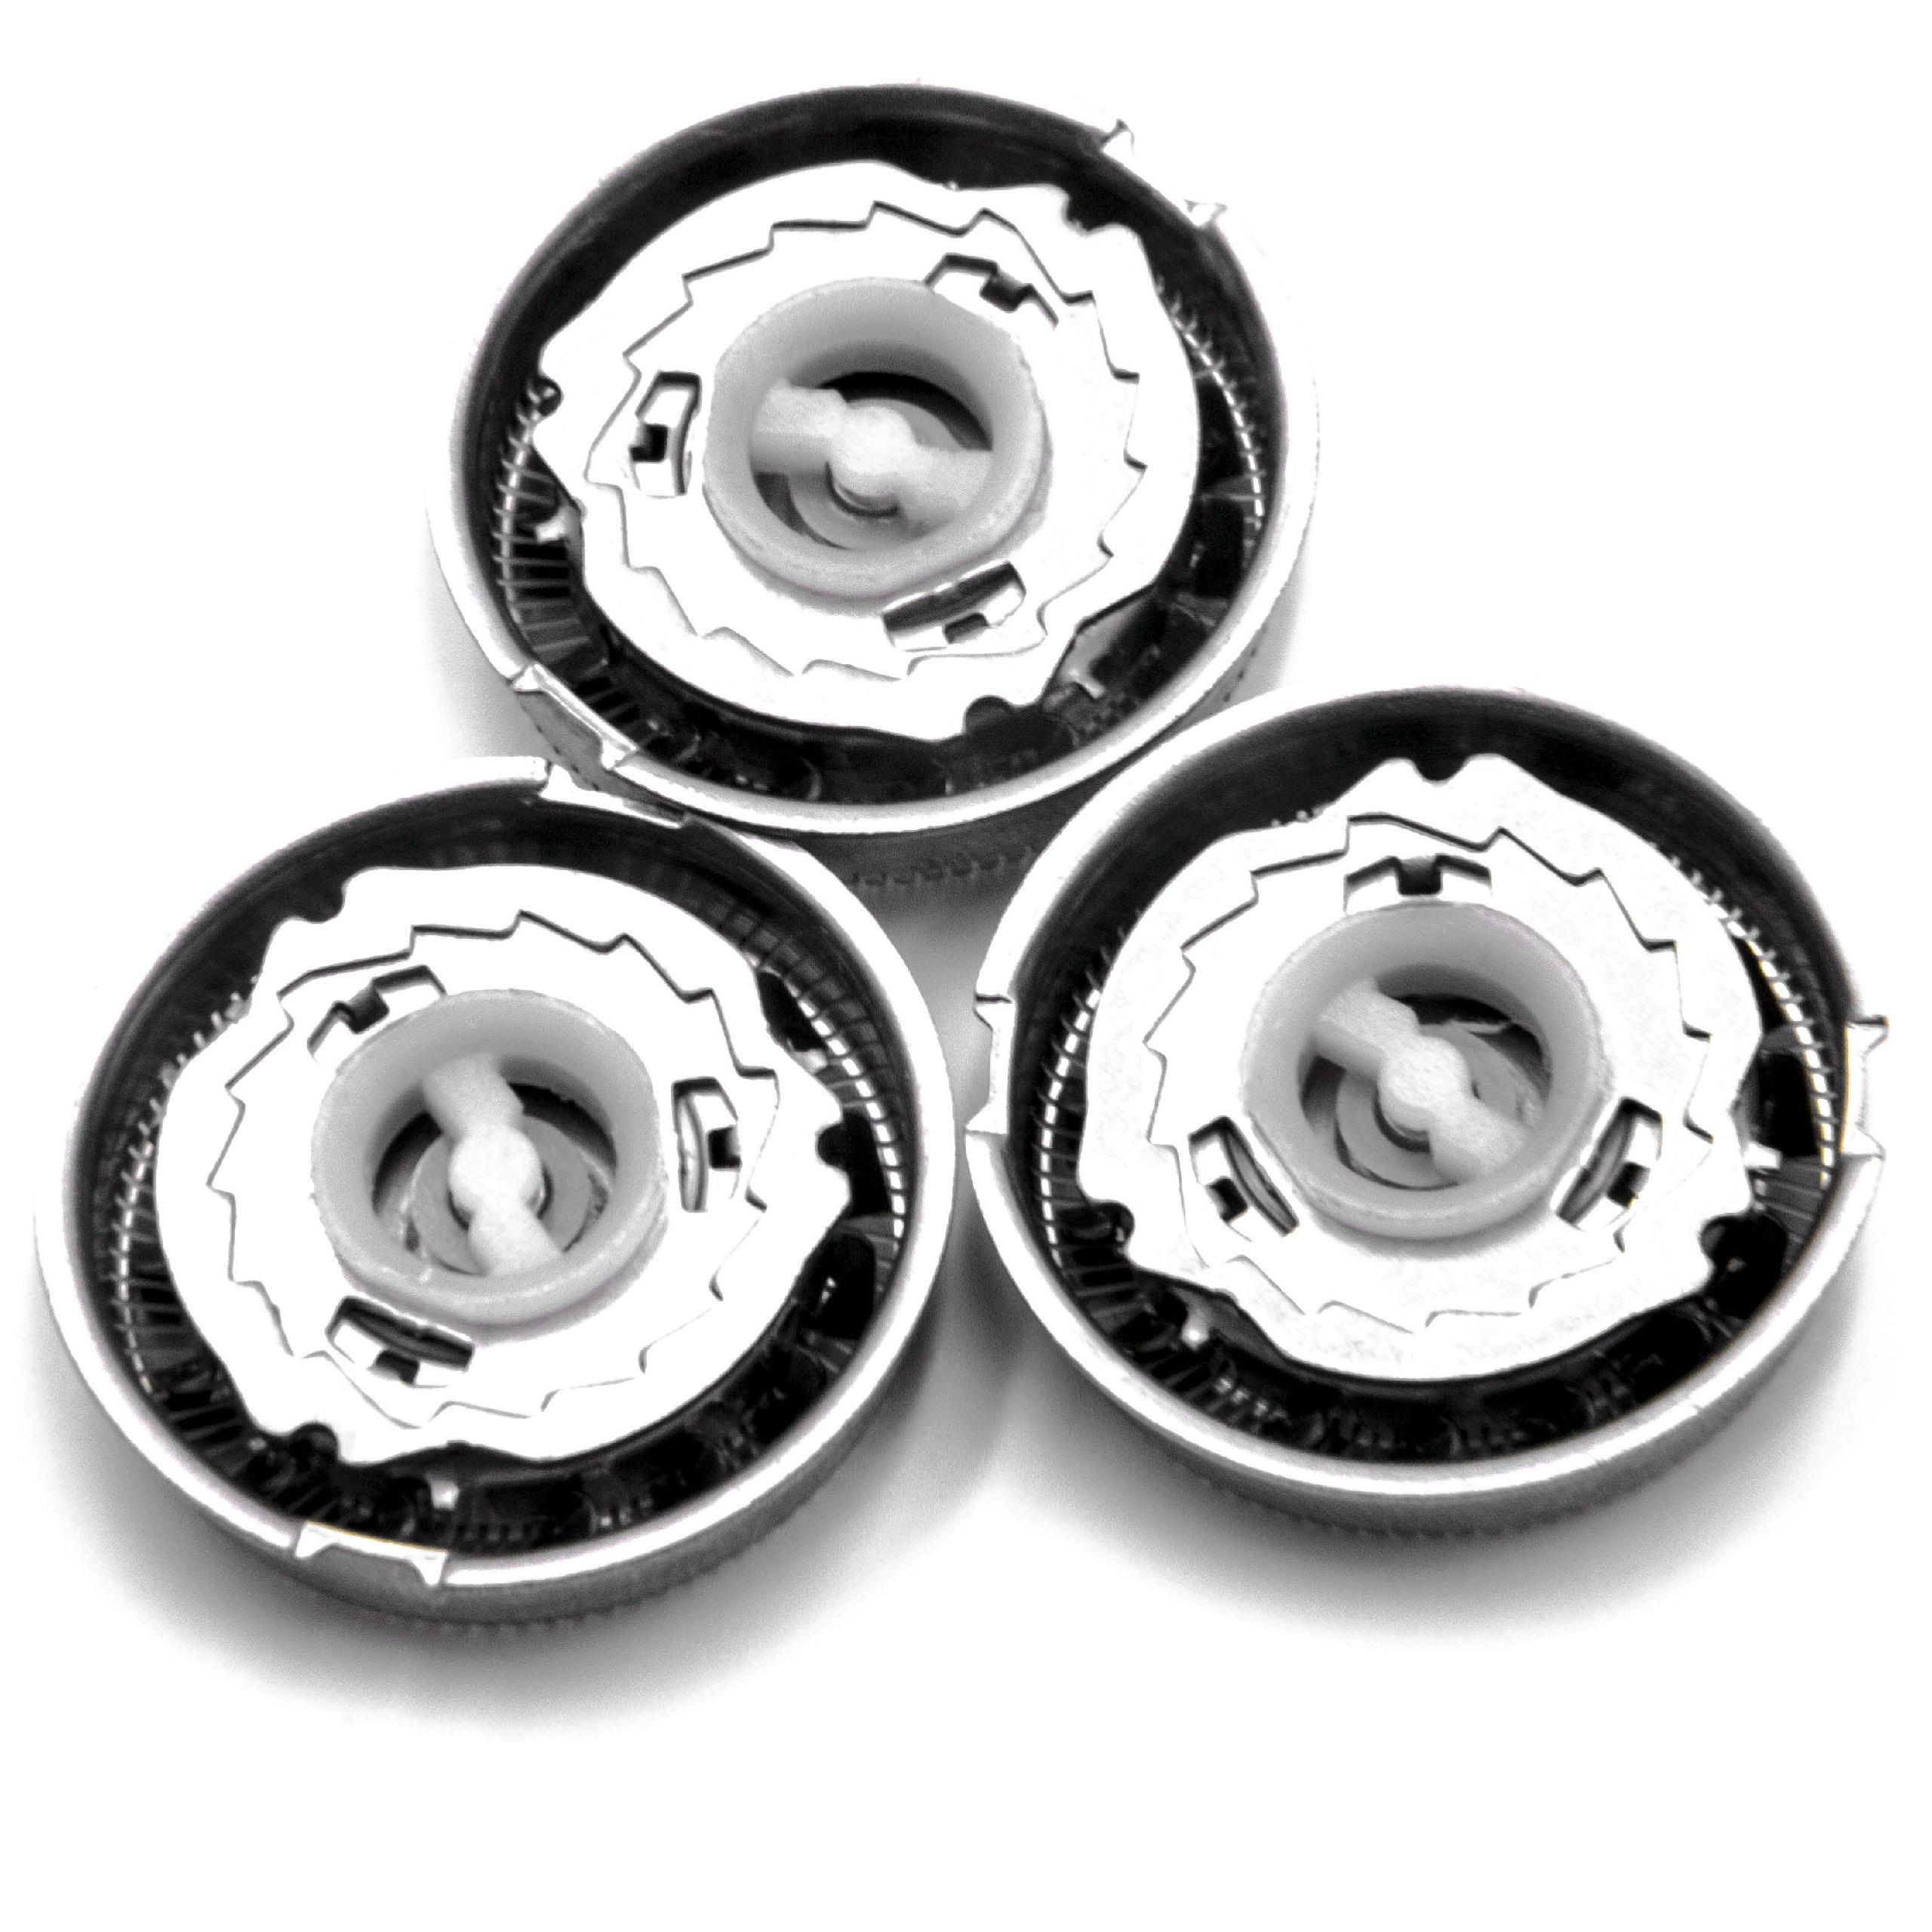 3x shaving head as Replacement for Philips HP1917, HQ2 for Philips Shaver - Stainless Steel